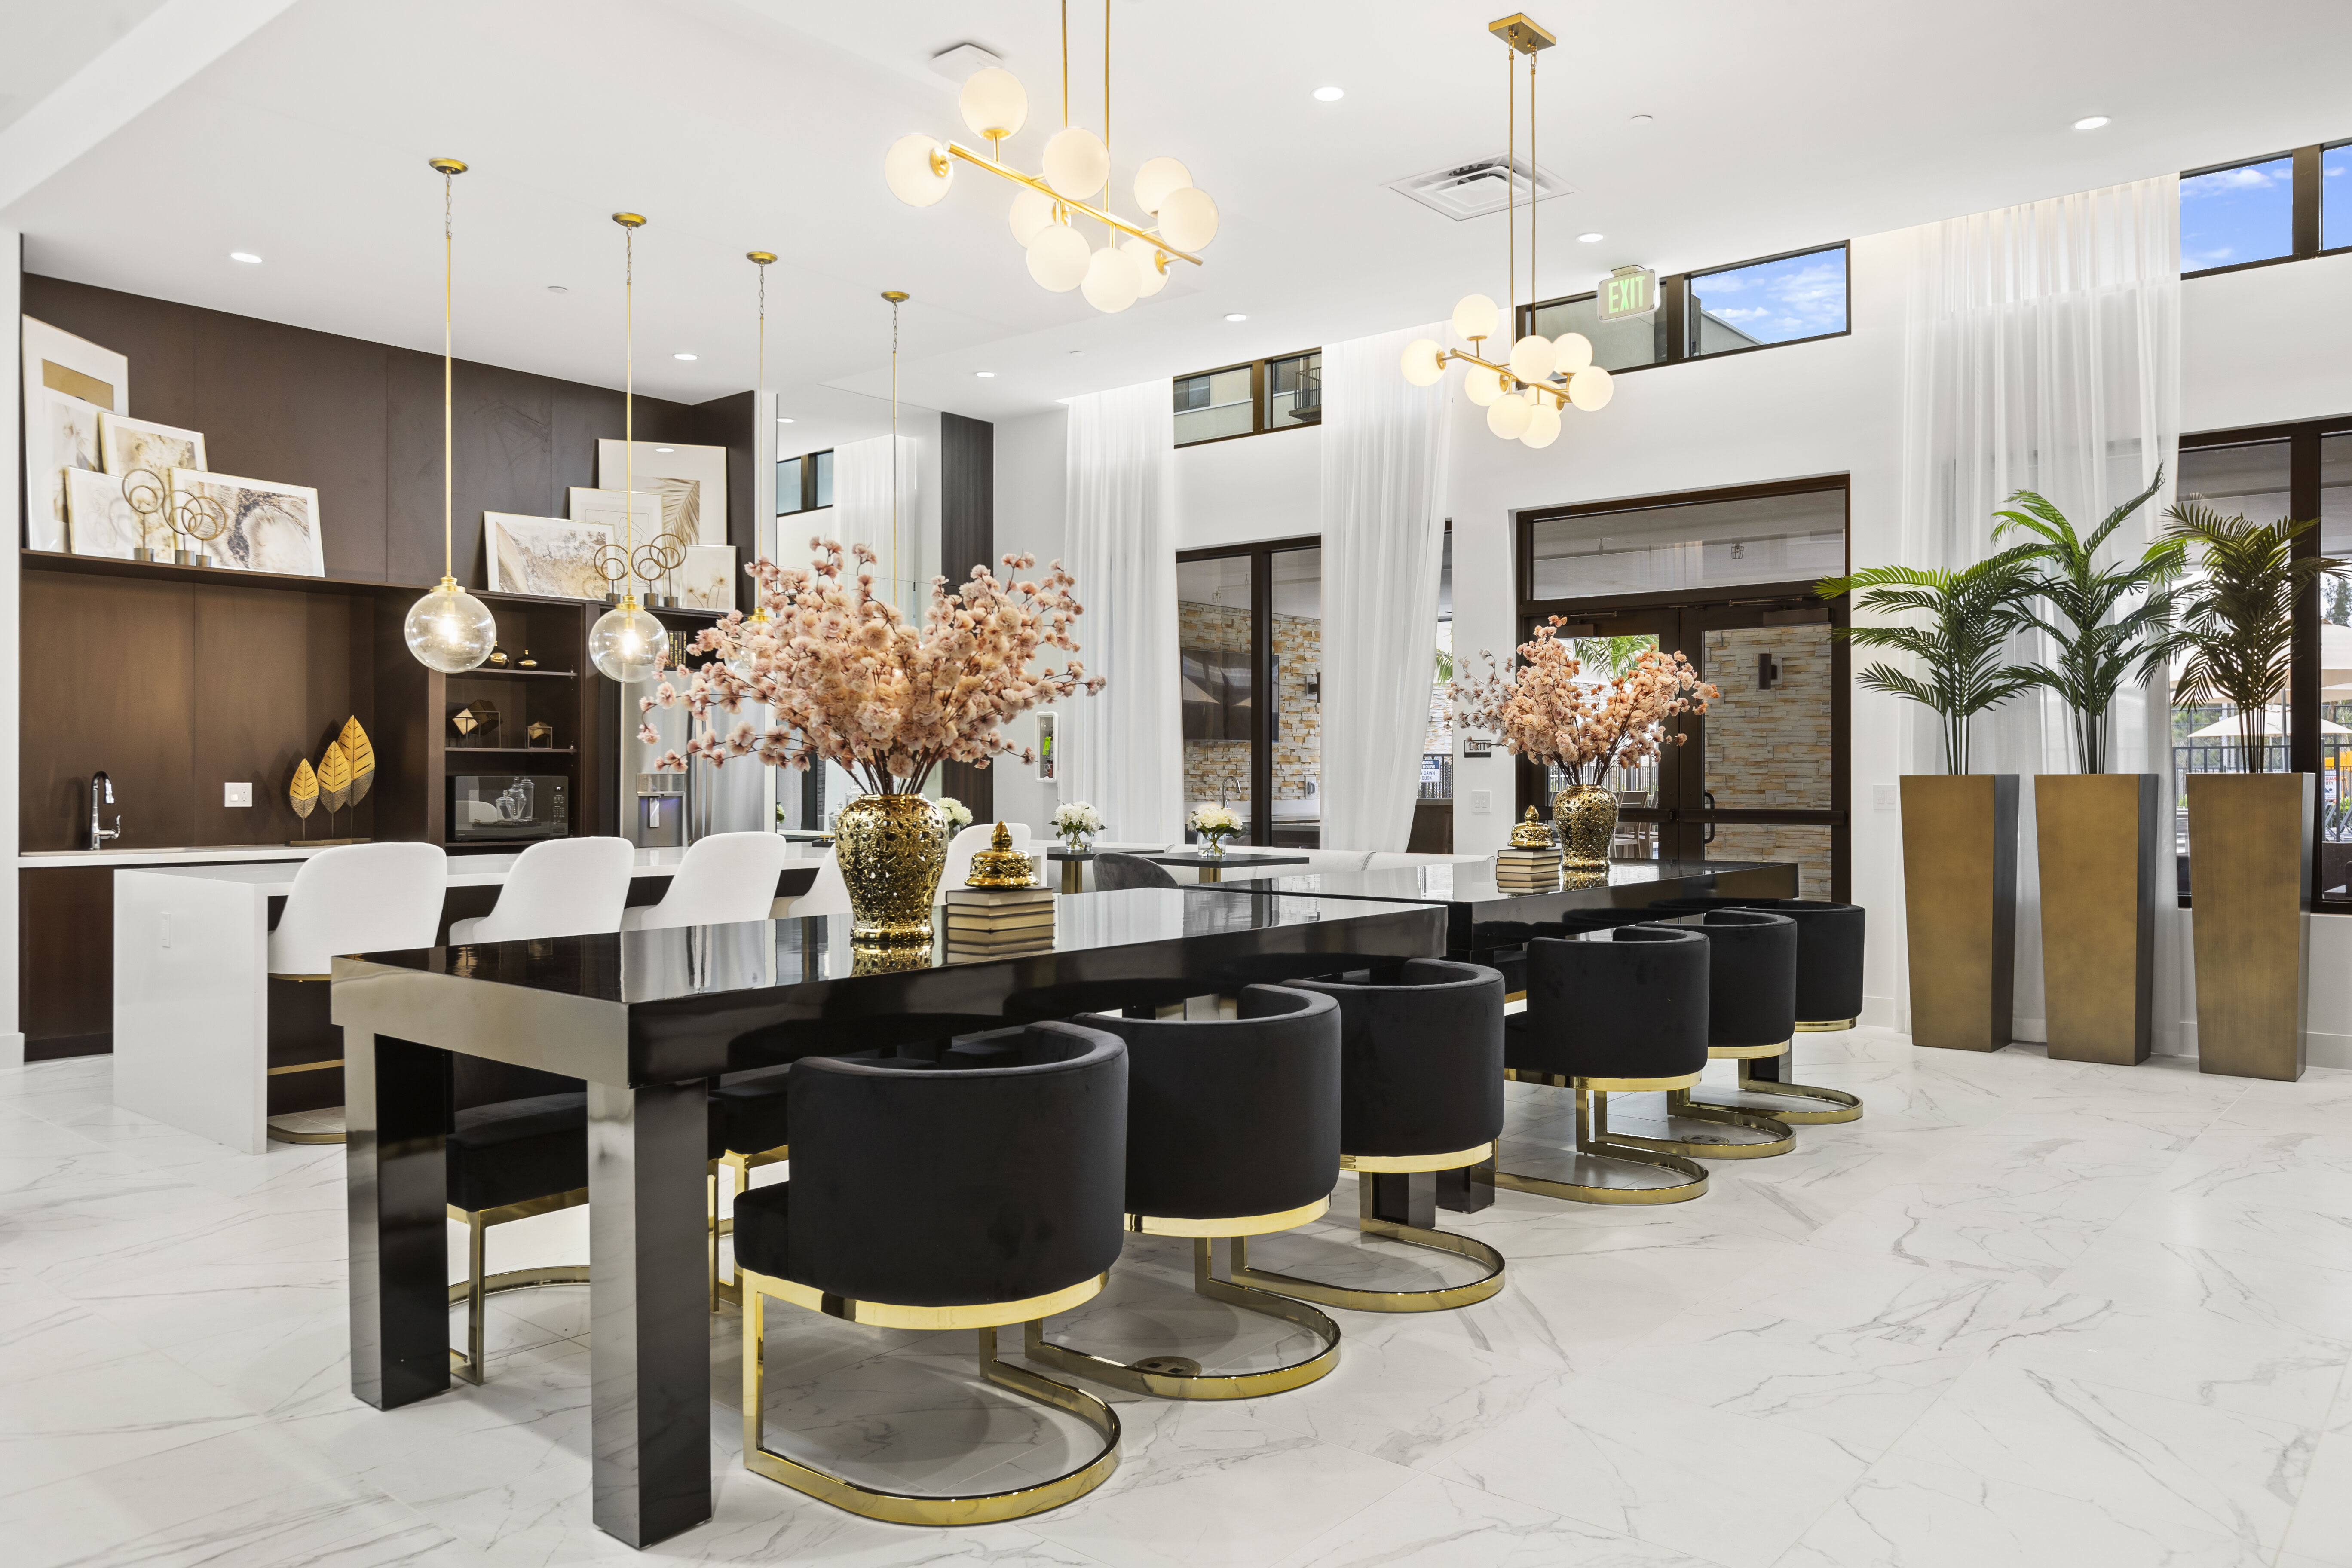 Luxurious clubhouse with high-end lighting, modern furnishings, and inviting seating at Pine Ridge, West Palm Beach, Florida